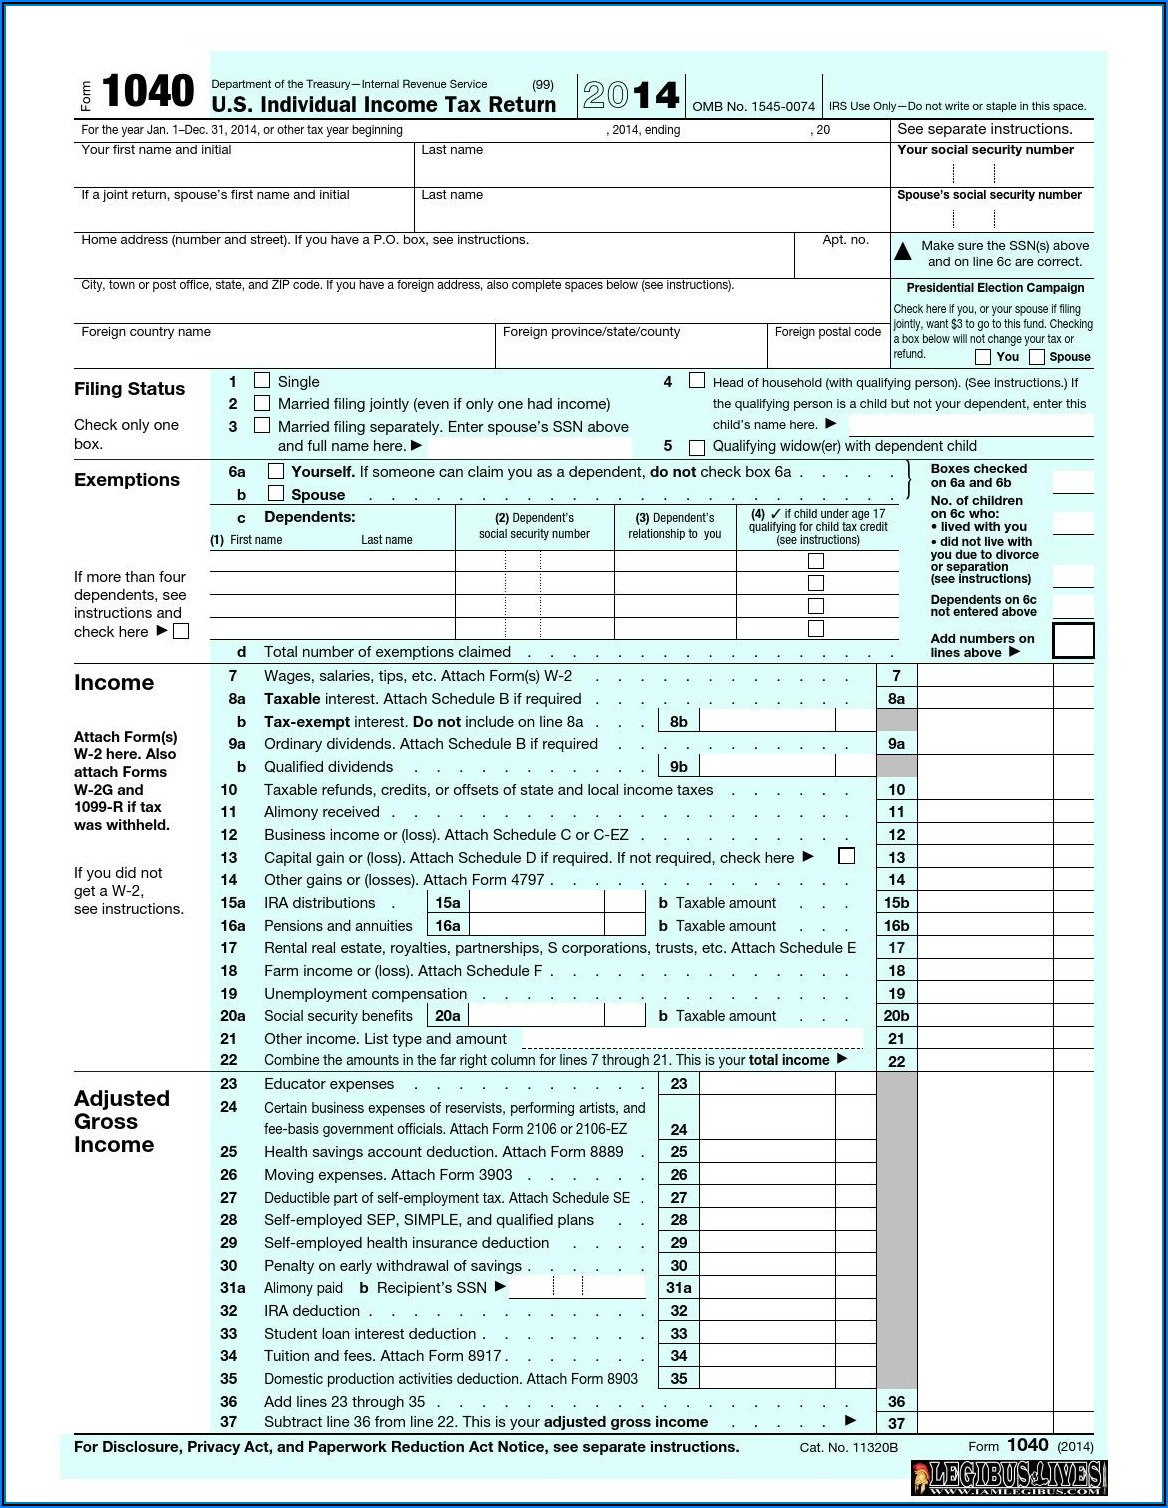 2013 Irs Form 1040a